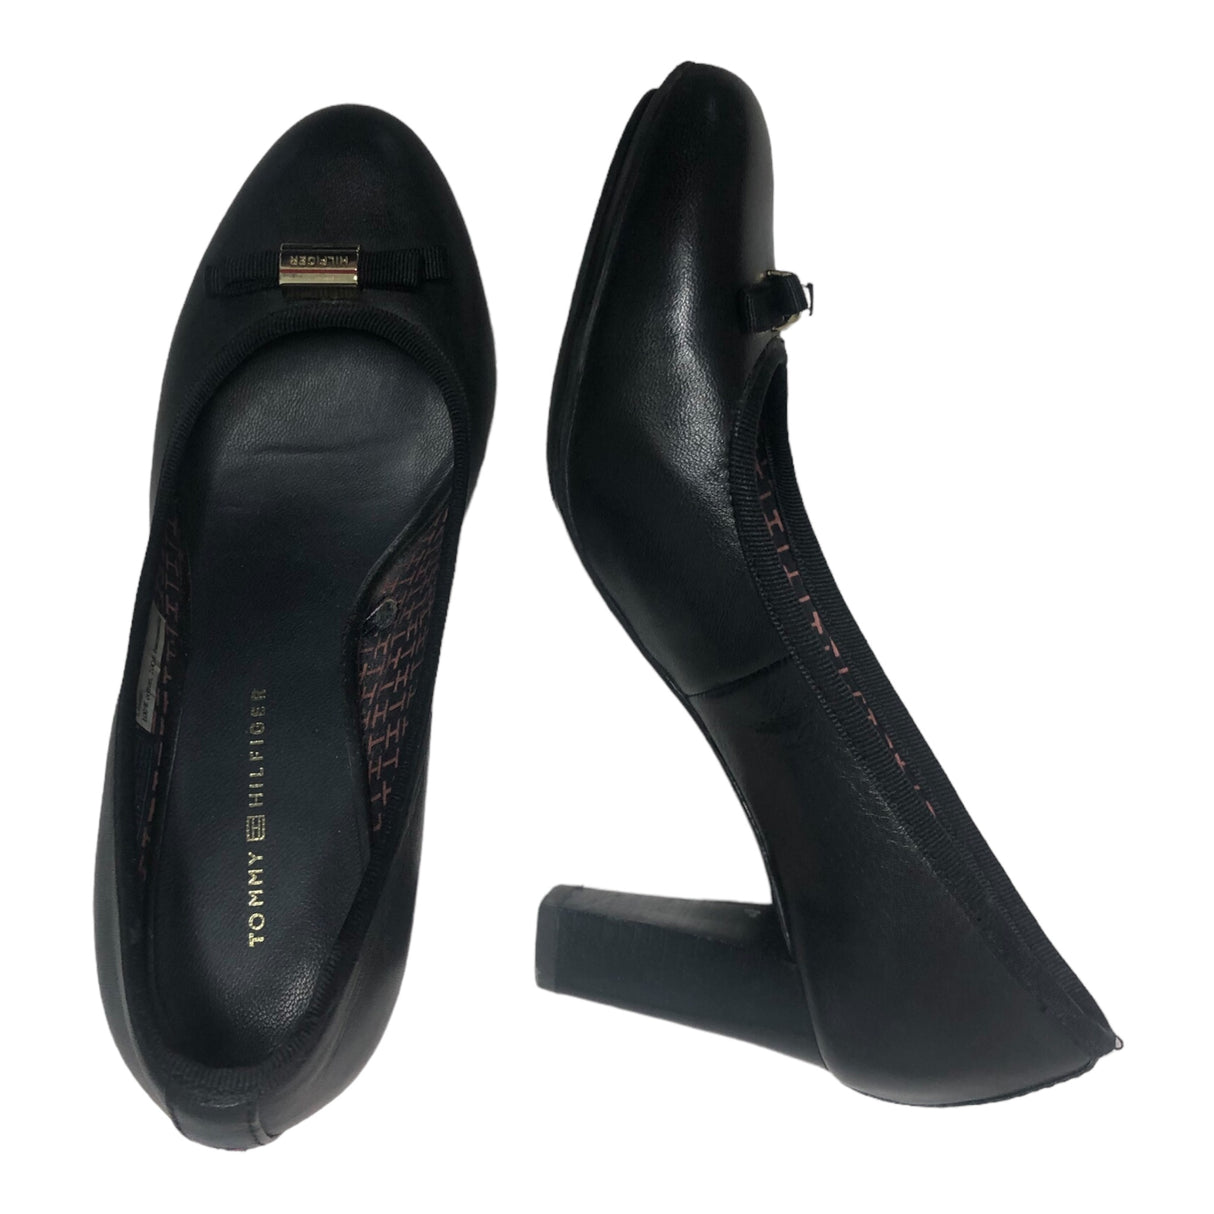 A Second Chance - Tommy hilfiger Leather High Heels - Lebanon